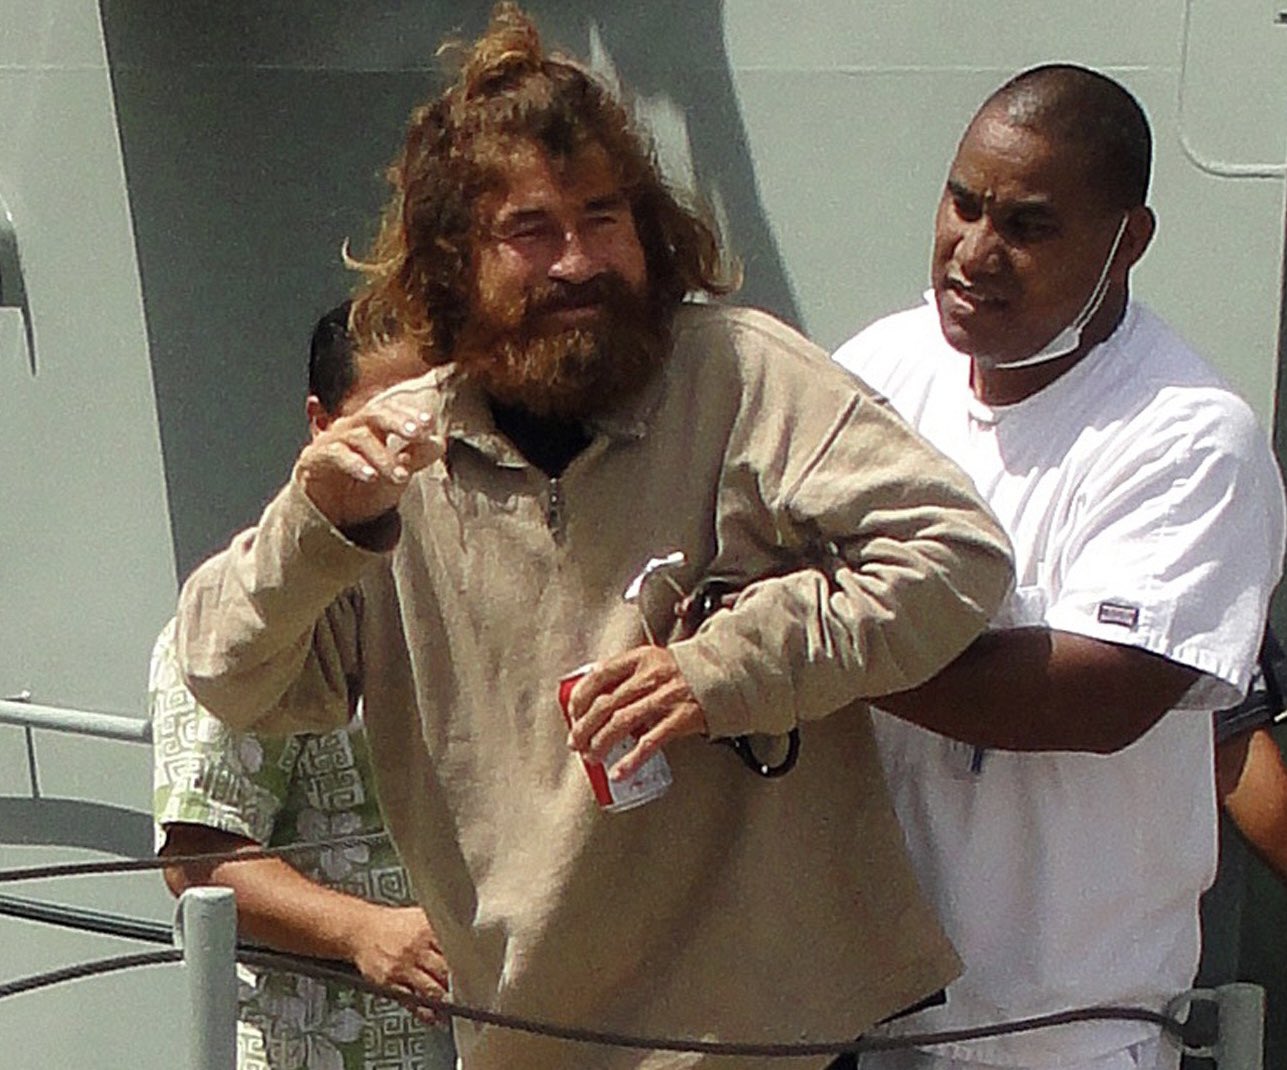 wtf facts - In 2012, a 36-year-old fisherman, Salvador Alvarenga, drifted over 10,000 km from Mexico in a small boat. He wasn’t seen again until 438 days later where he was found on the Marshall Islands, naked, clutching a knife and shouting in Spanish. H